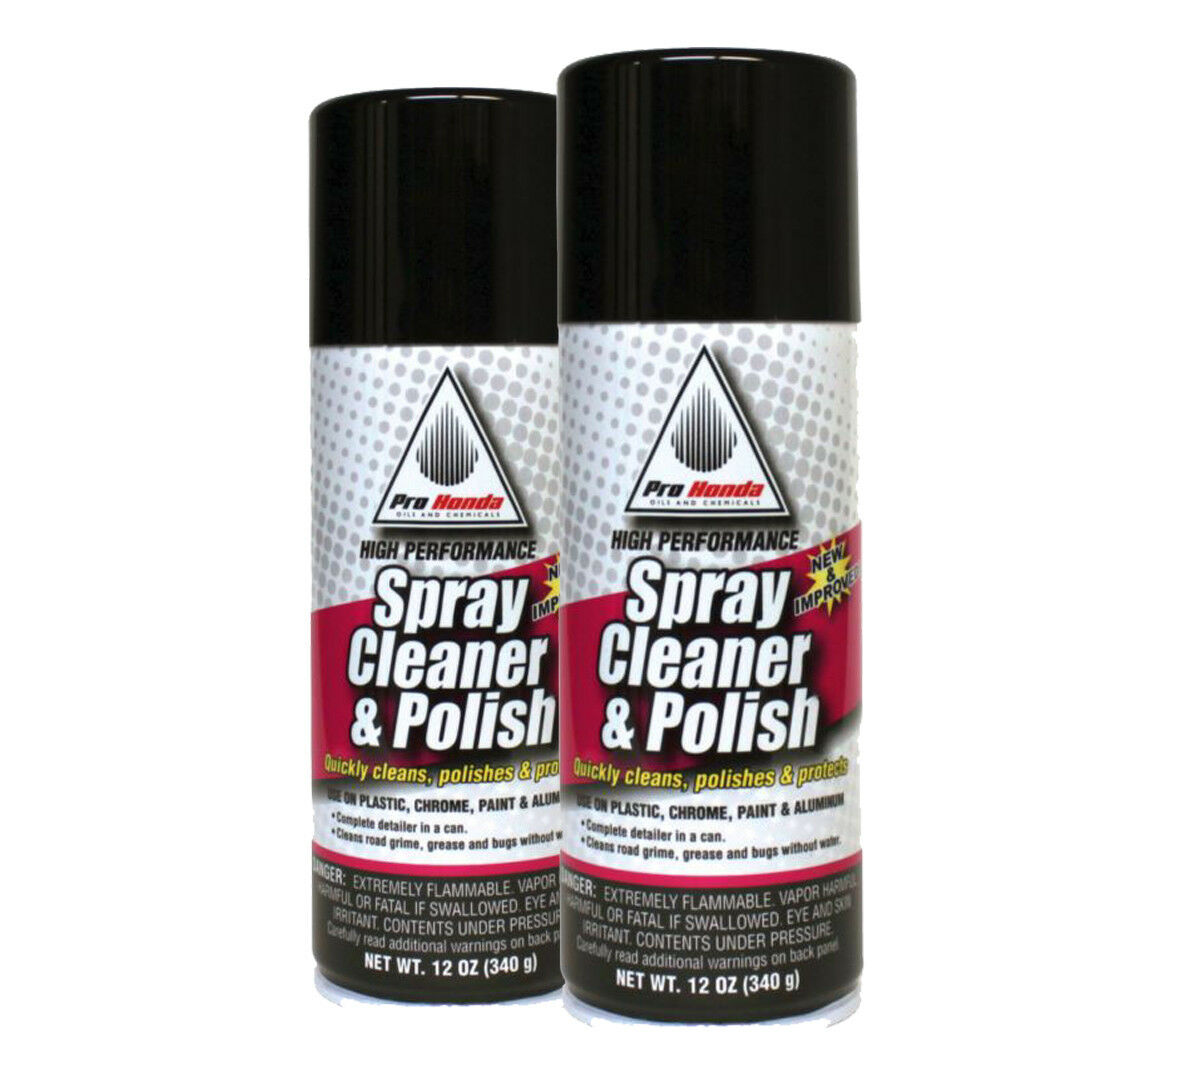 Pro Honda Motorcycle High Performance Spray Cleaner & Polish 2 Cans 12 Oz